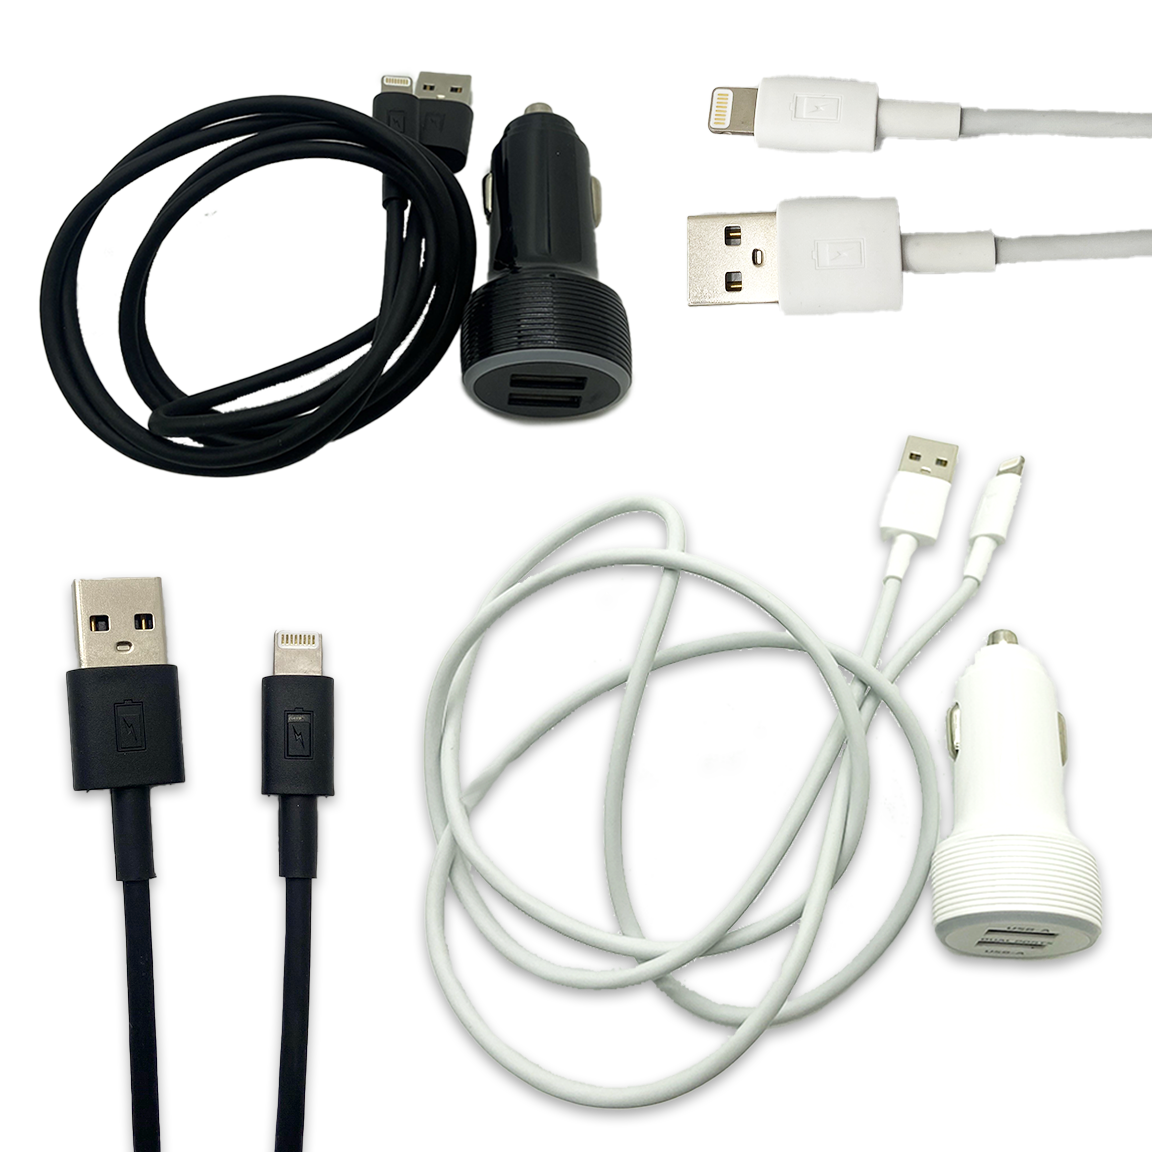 Car Charger Dual USB Ports with USB to Lightning Charging Cable Set - 3 Pieces Per Pack 24620